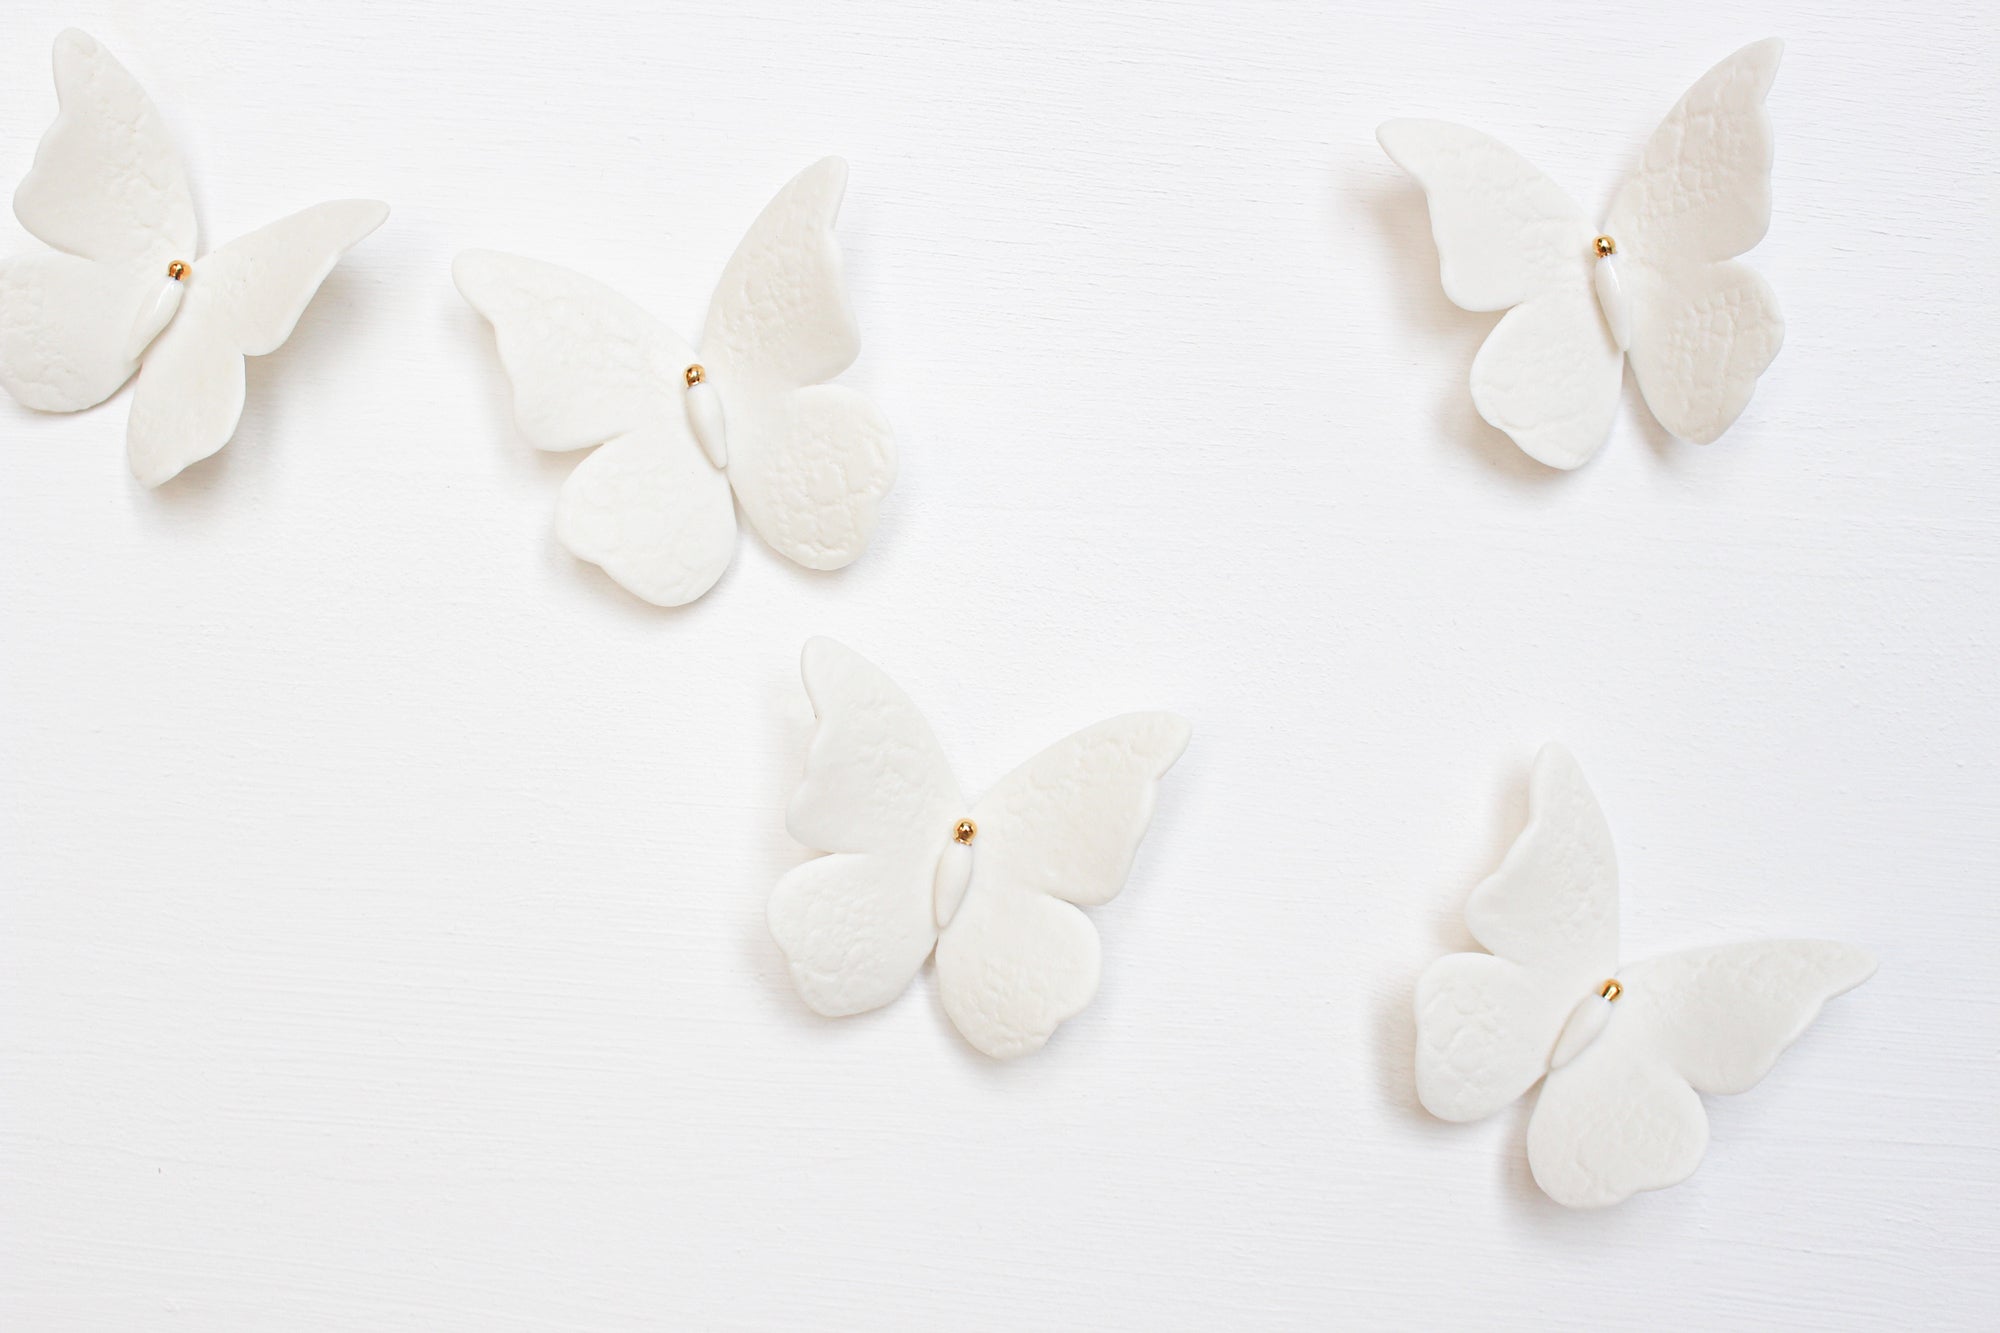 Porcelain Lace Butterflies for Wall Decoration by Alain Granell